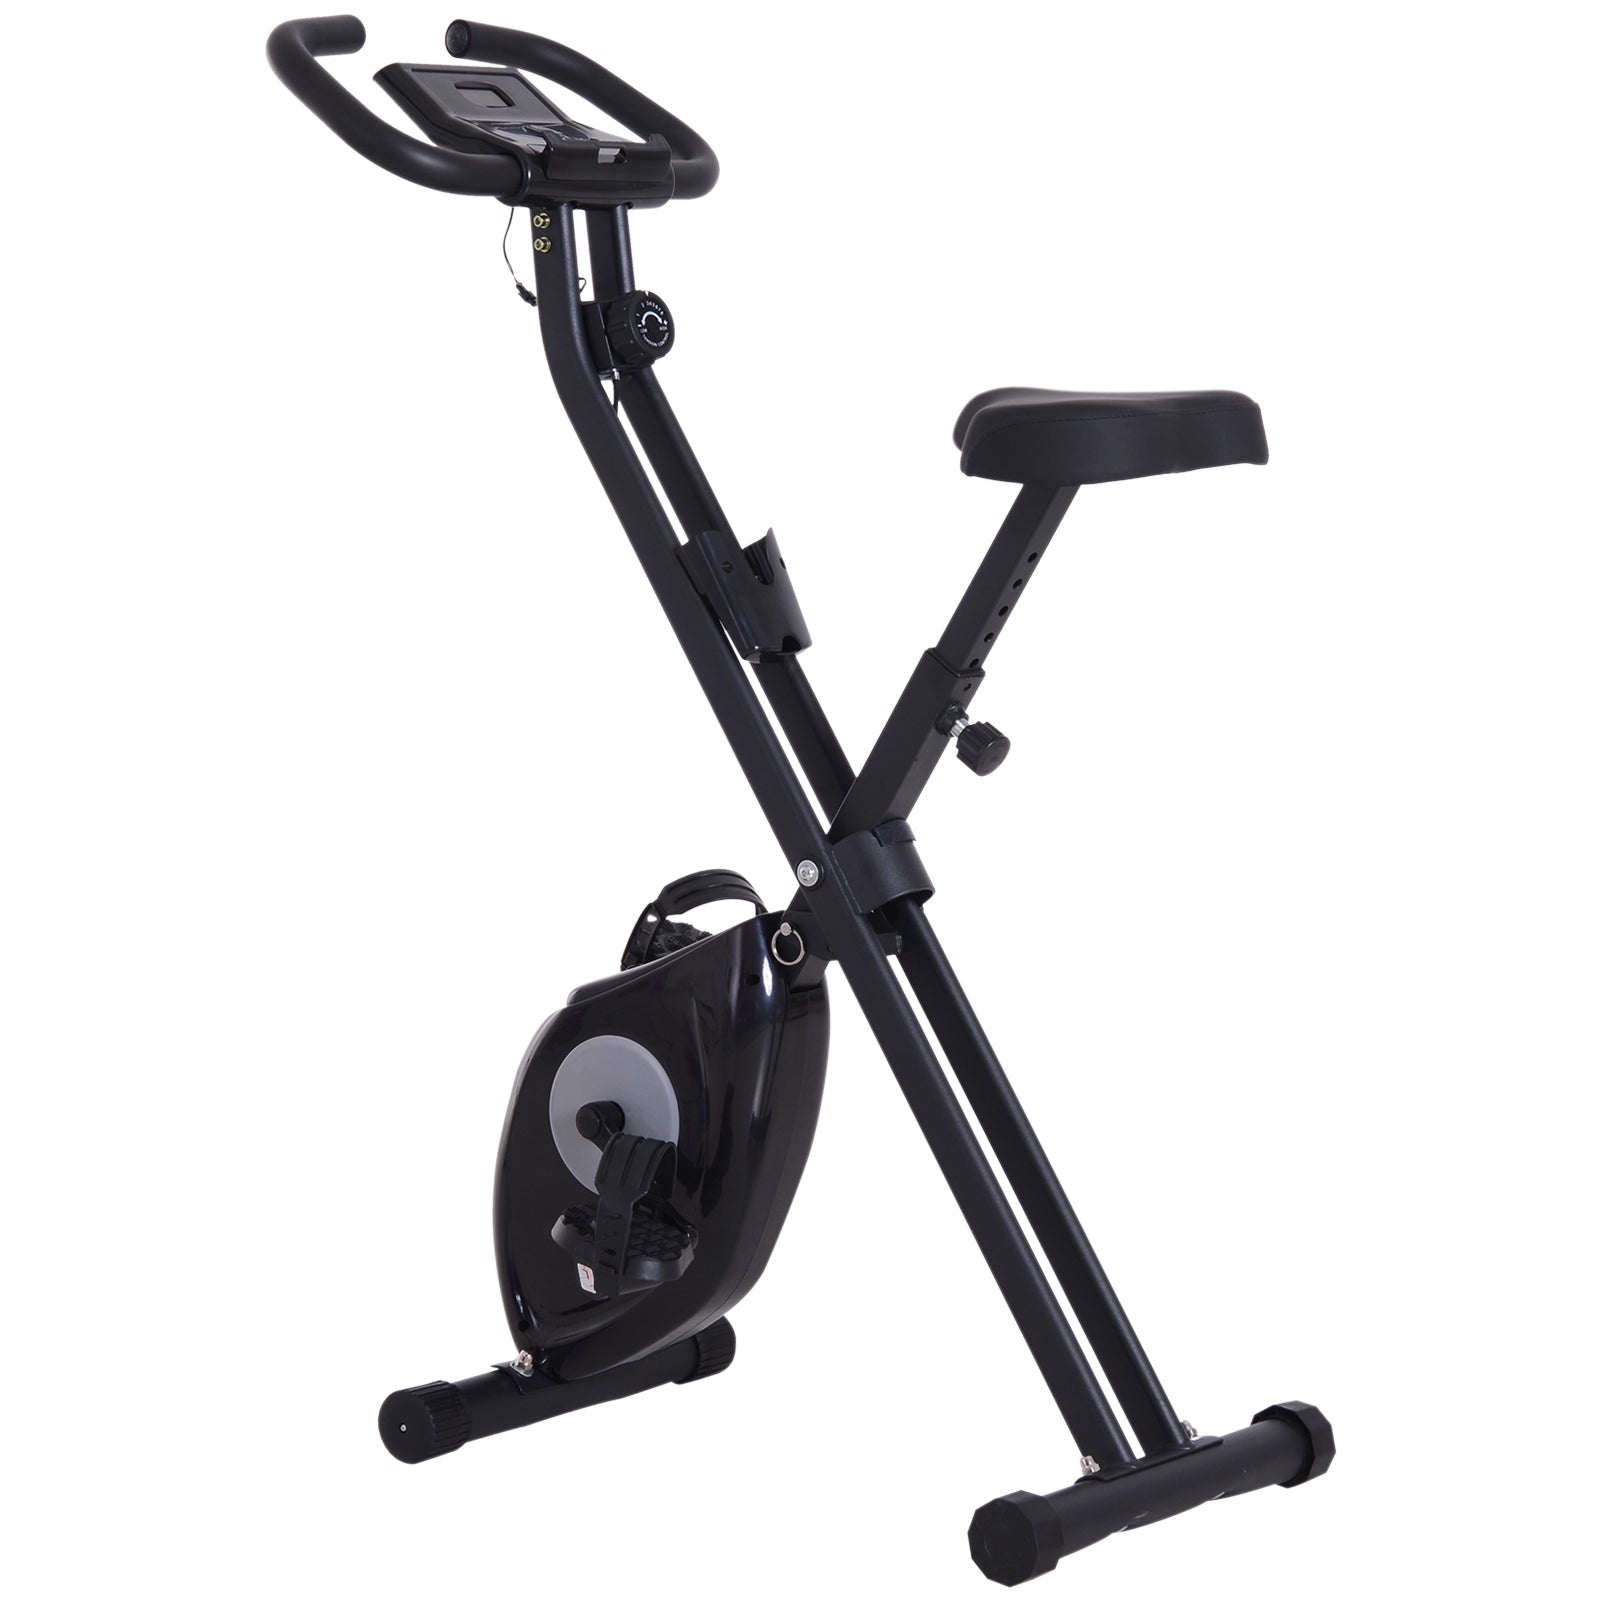 Foldable Exercise Bike with 8-Level Adjustable Magnetic Resistance, Indoor Stationary Bike X Bike with LCD Screen, Tablet Phone Holder for Home Aerobic Training, Black at Gallery Canada